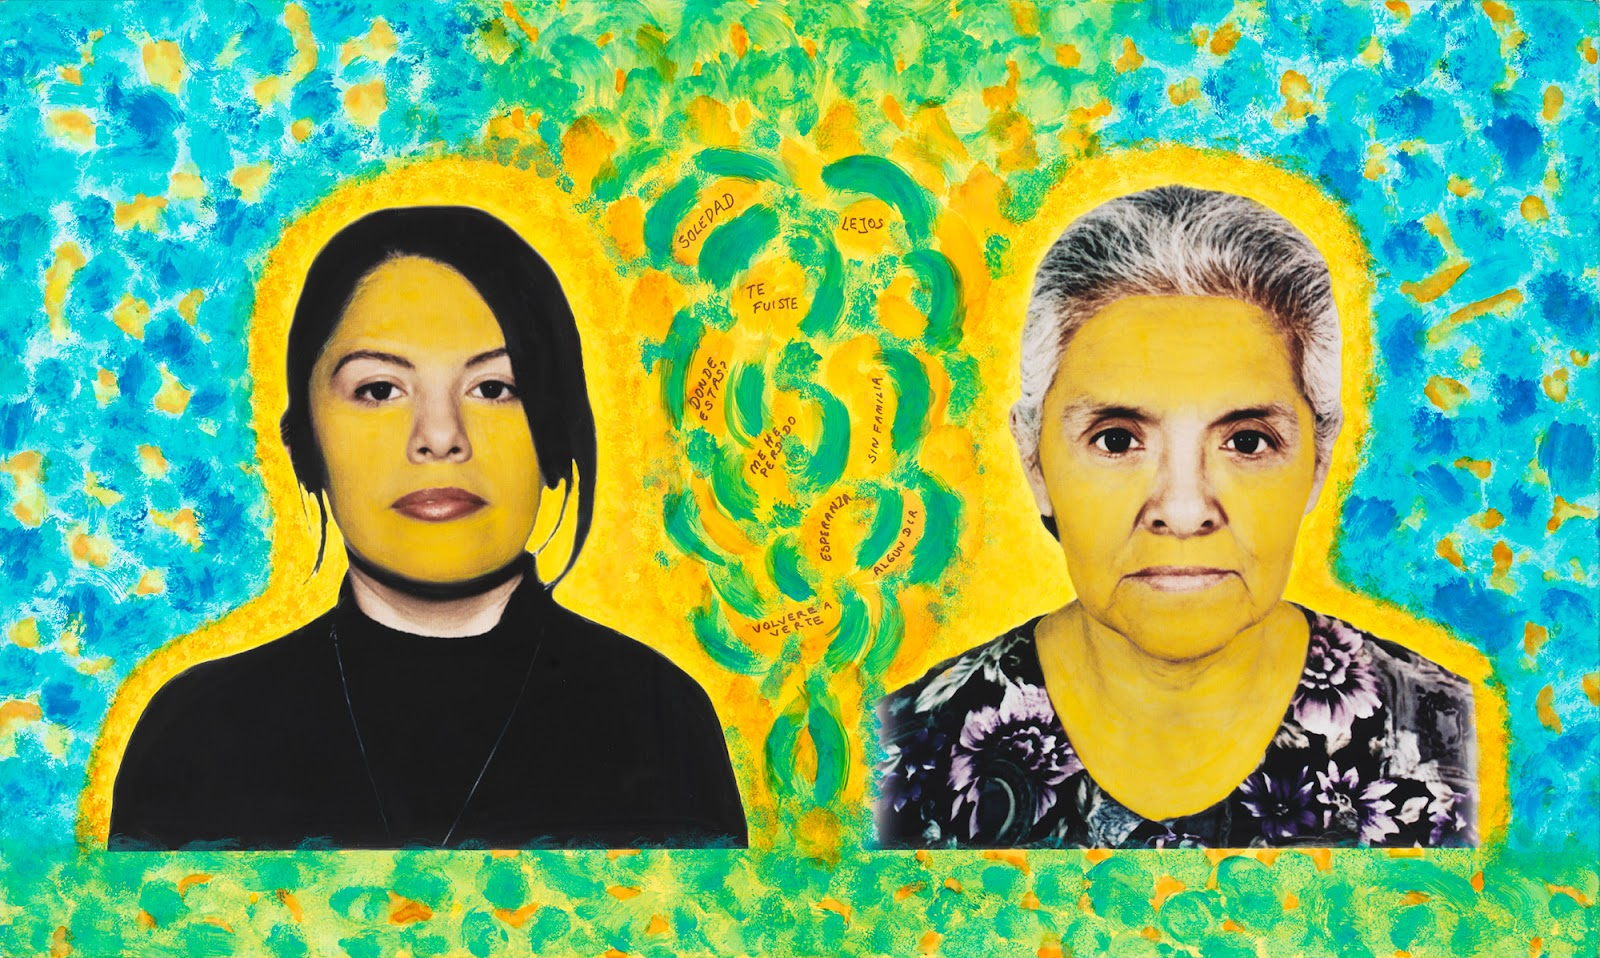 The color portraits of two women, Mabel and her mother, their faces painted in yellow stand against a vibrant, painterly background showcasing blue, green, yellow, and orange hues.